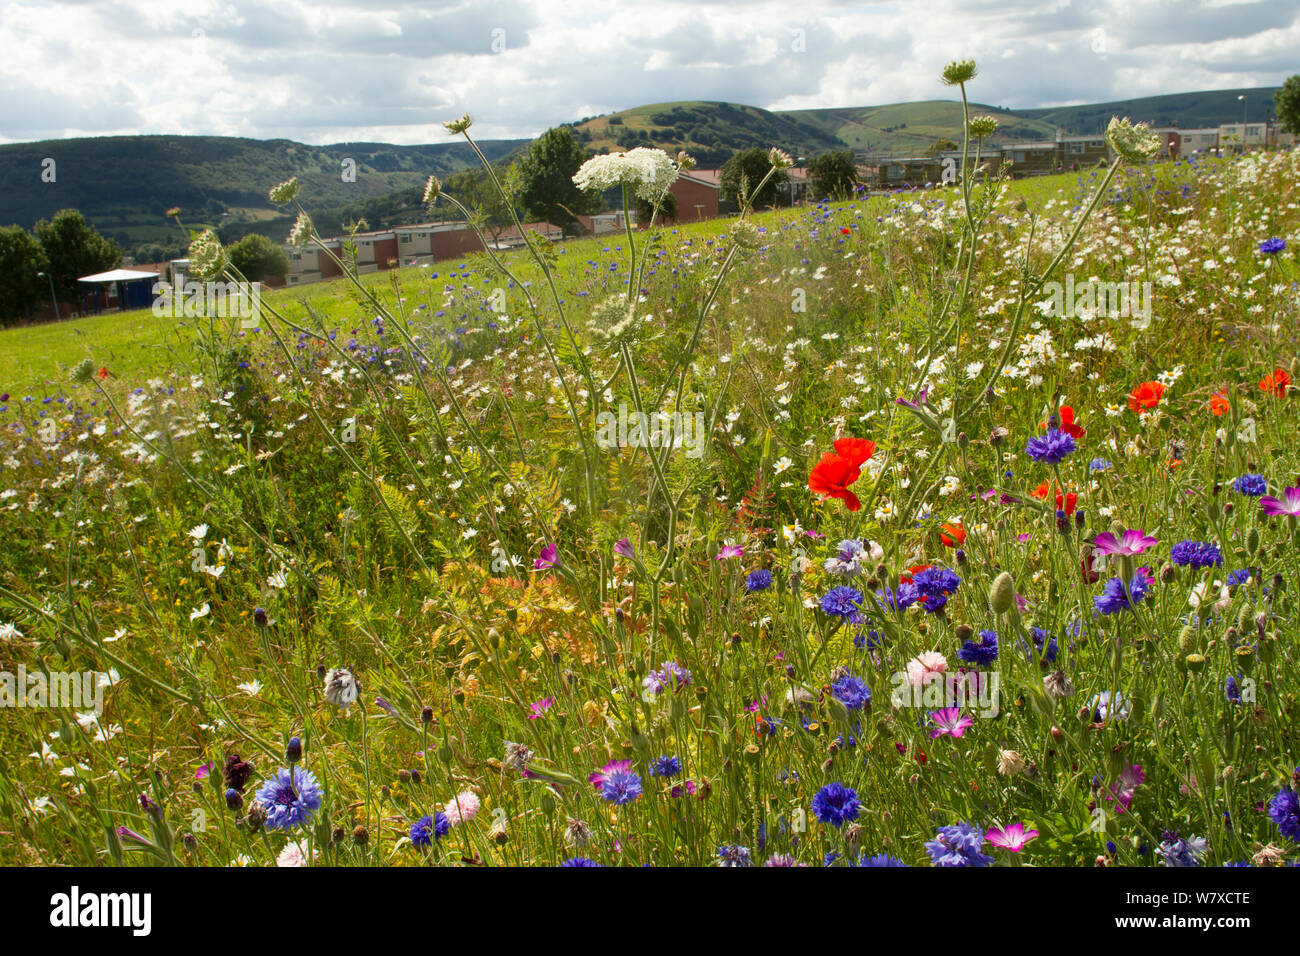 Wildflowers including Wild carrot (Daucus carota) and Cornflowers (Centaurea cyanus) planted in community green space to attract bees. Part of collaboration between Bron Afon community Housing Trust and the Friends of the Earth &#39;Bee Friendly&#39; project. South Wales, UK, July 2014. Stock Photo